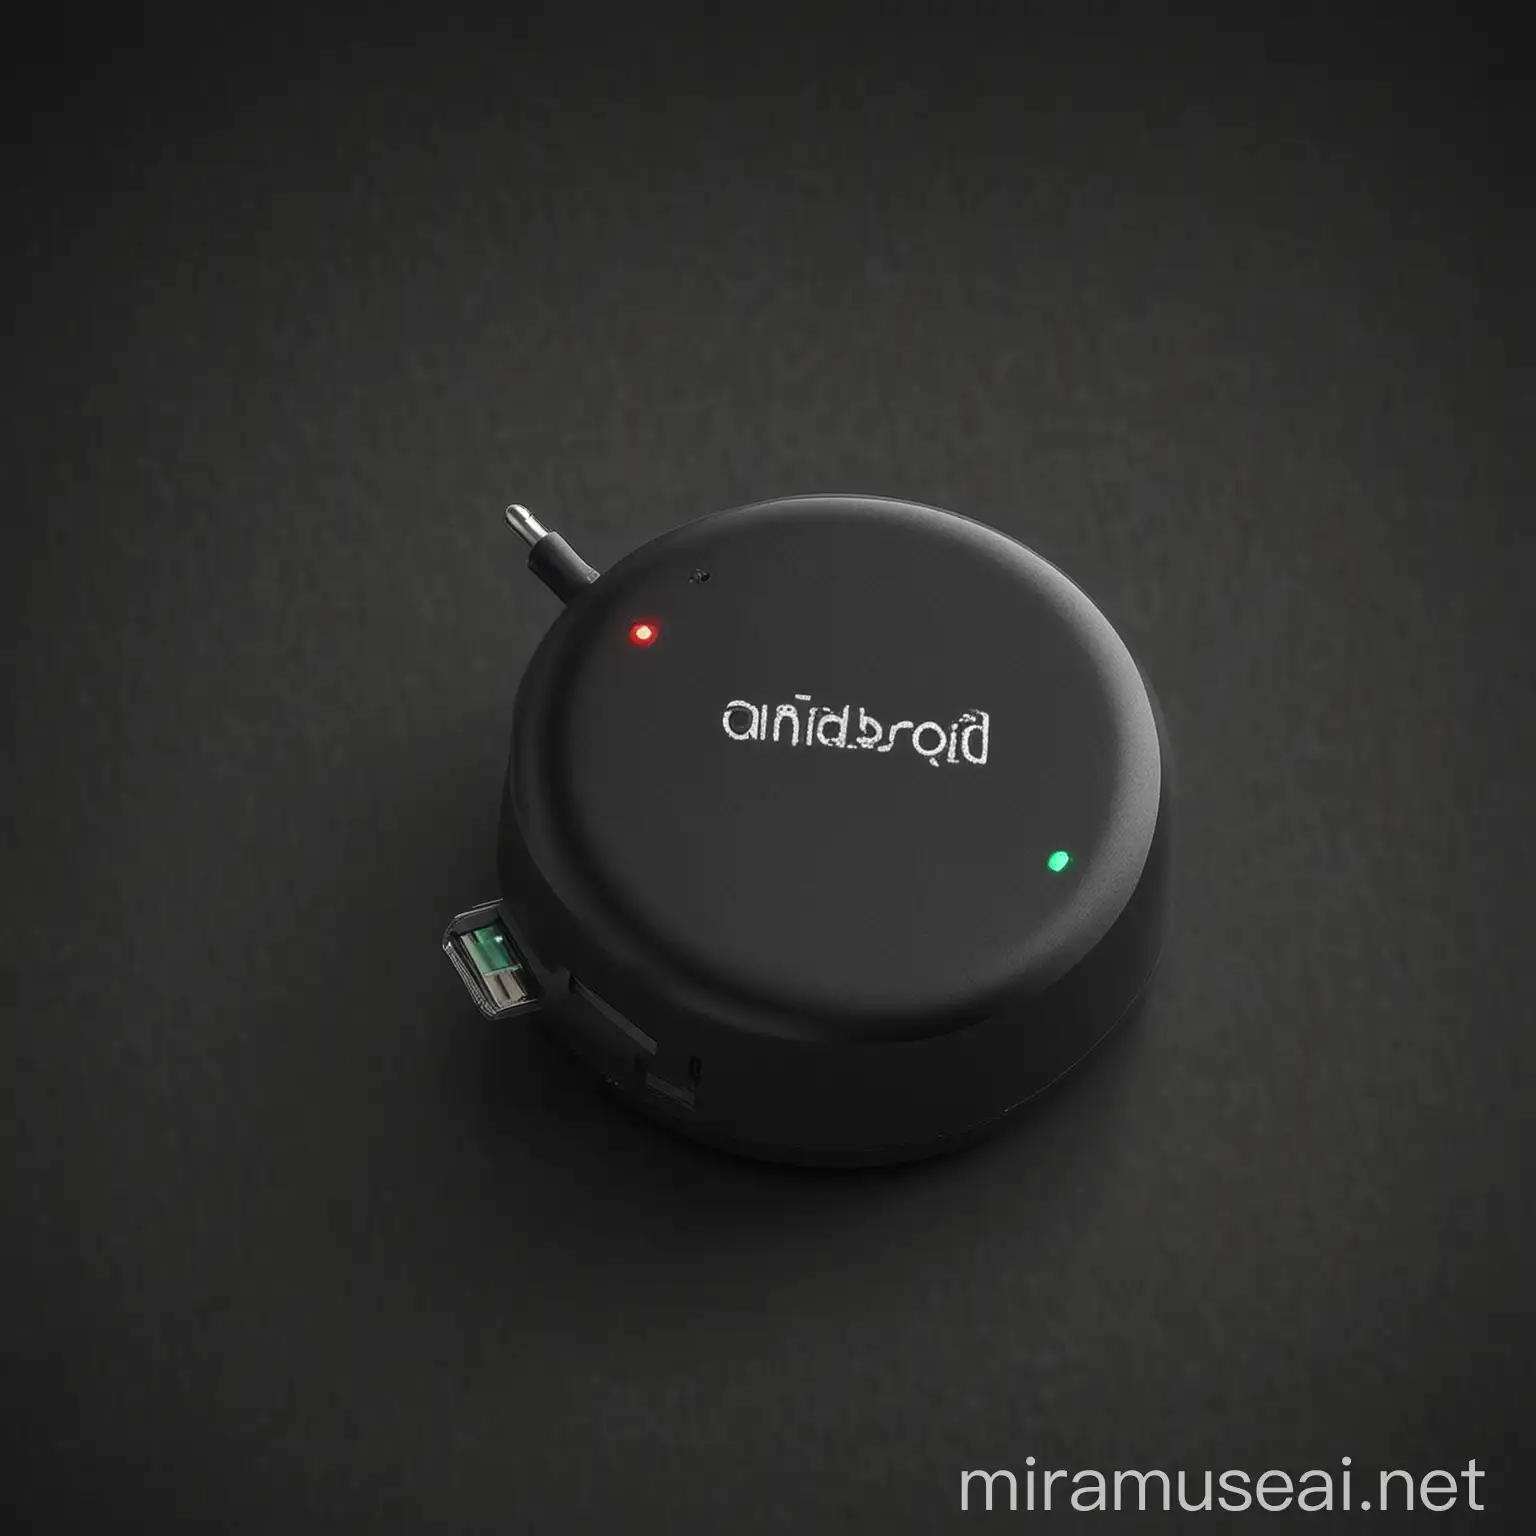 Create an image of a sleek, small device called 'EasyDrop' that connects to the charging port of an Android smartphone. The device should have a modern, minimalistic design, similar in size and shape to a USB flash drive. It should have a smooth, matte black finish with subtle, soft-touch edges for a premium look. The top of the device should feature a small, discreet LED indicator light. The device should also have a small logo that reads 'AndroidDrop' in a clean, futuristic font. Additionally, include a visual representation of wireless signals emanating from the device to illustrate its wireless connectivity capabilities with nearby Apple devices.